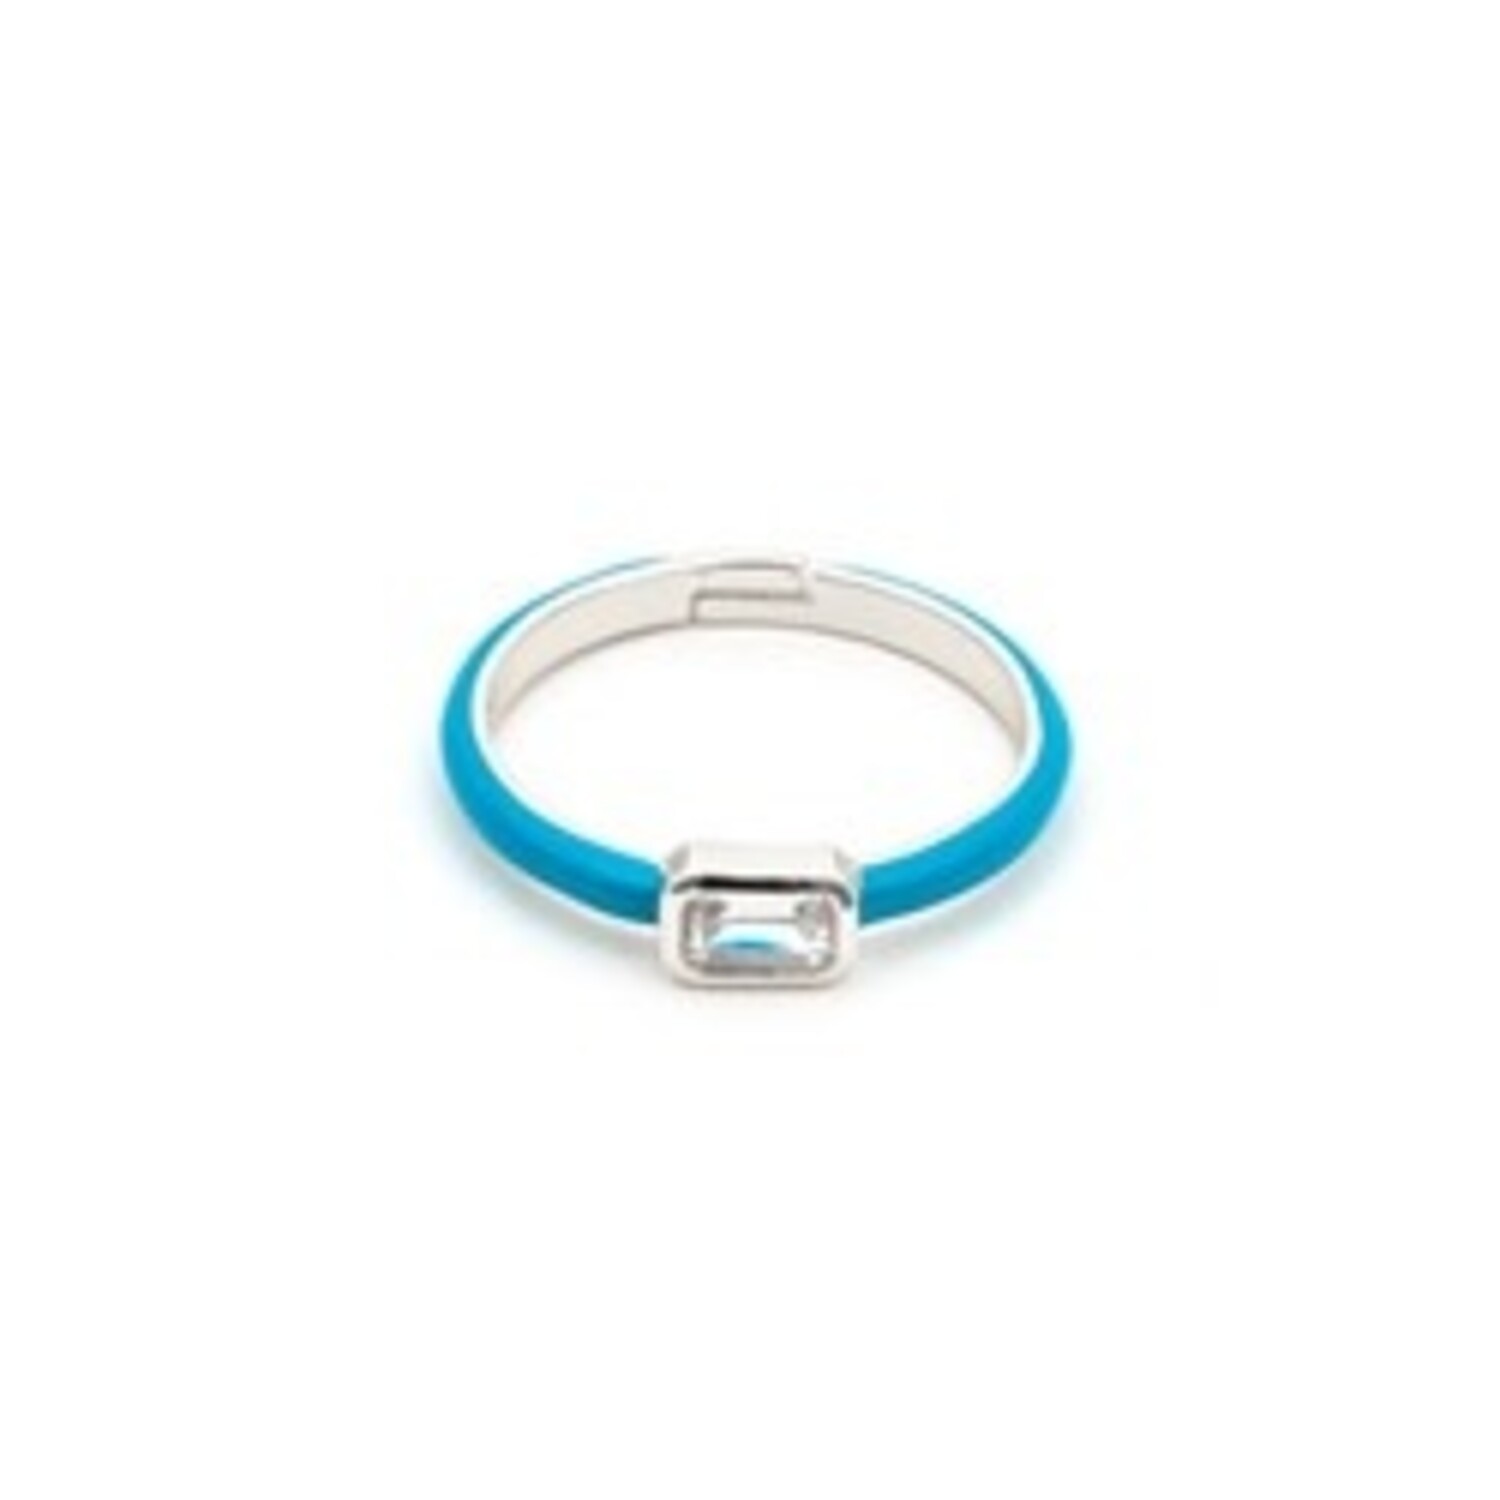 CAI - COOL AND INTERESTING Joyful Glam Enamel Ring - Amber Marie and Company